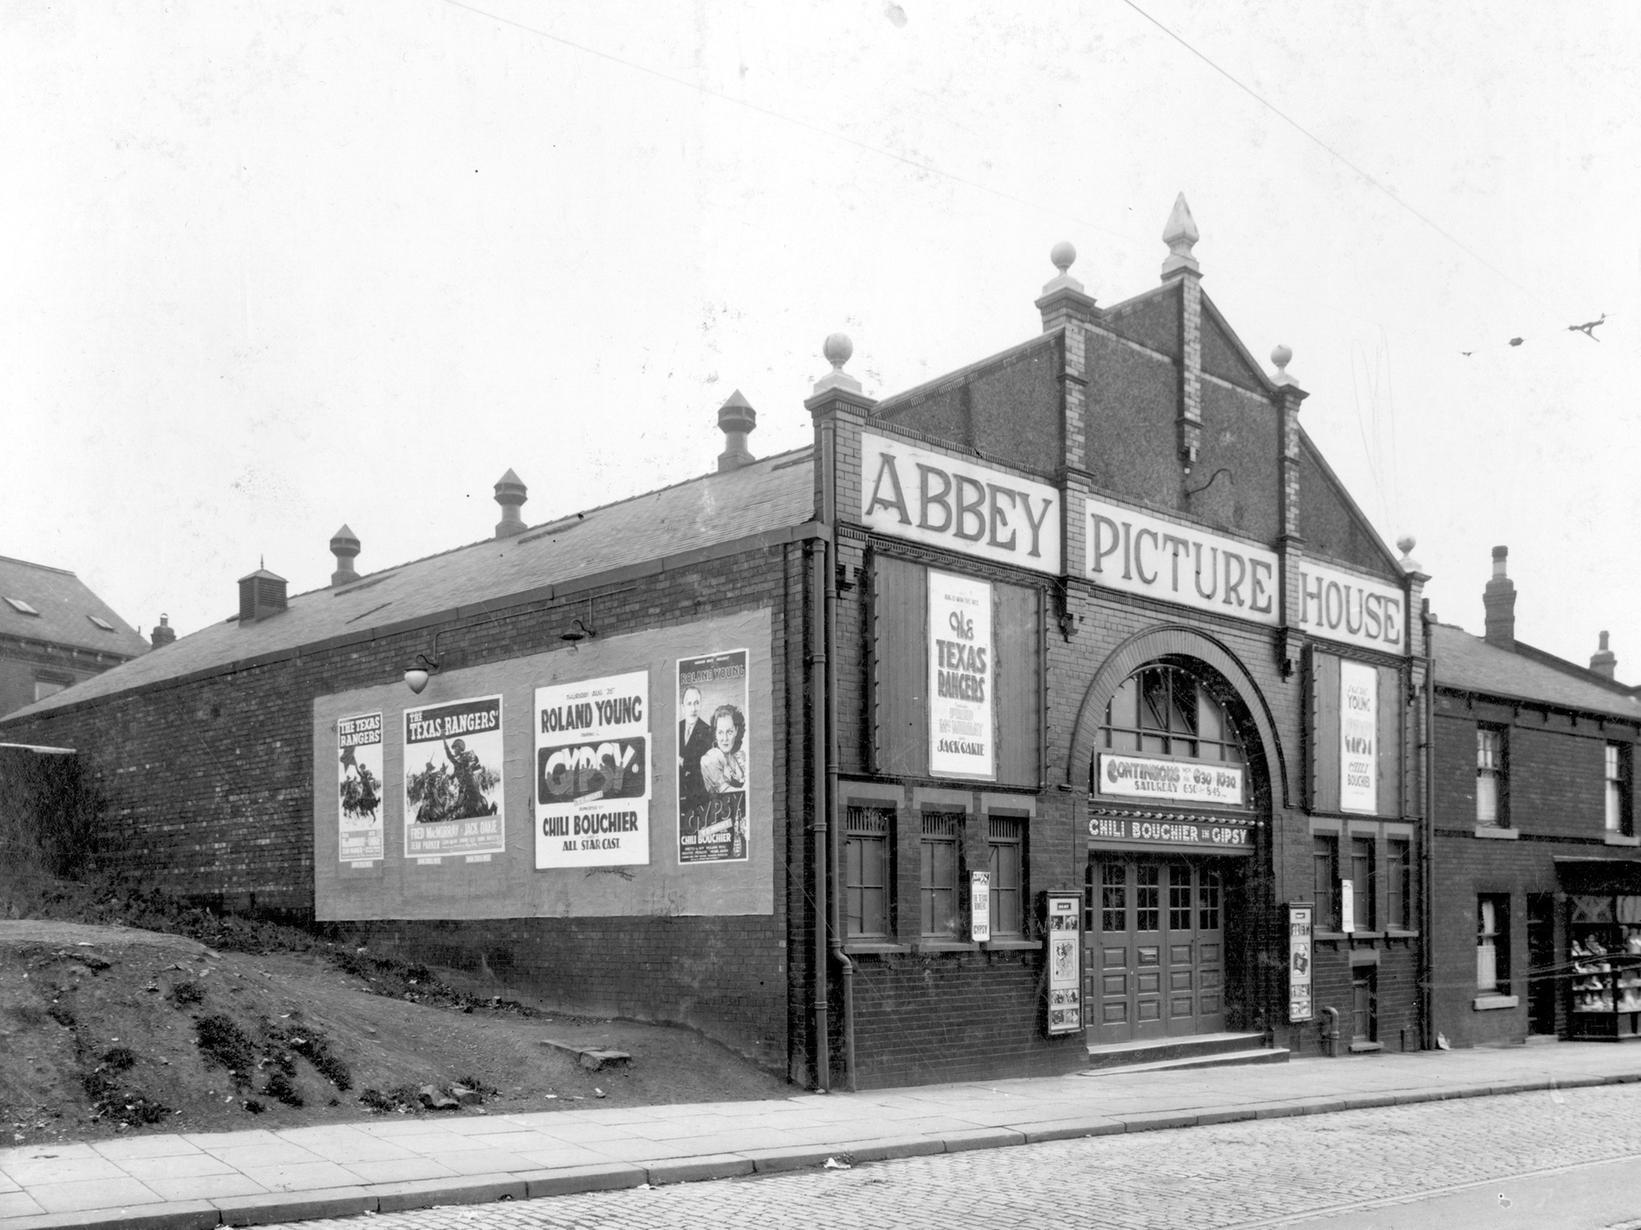 Abbey Picture House on Abbey Road in Kirkstall. It boasted 520 seats with music provided from an orchestral balcony. Closed in Octoebr 1960. The last film shown was Idle on Parade.